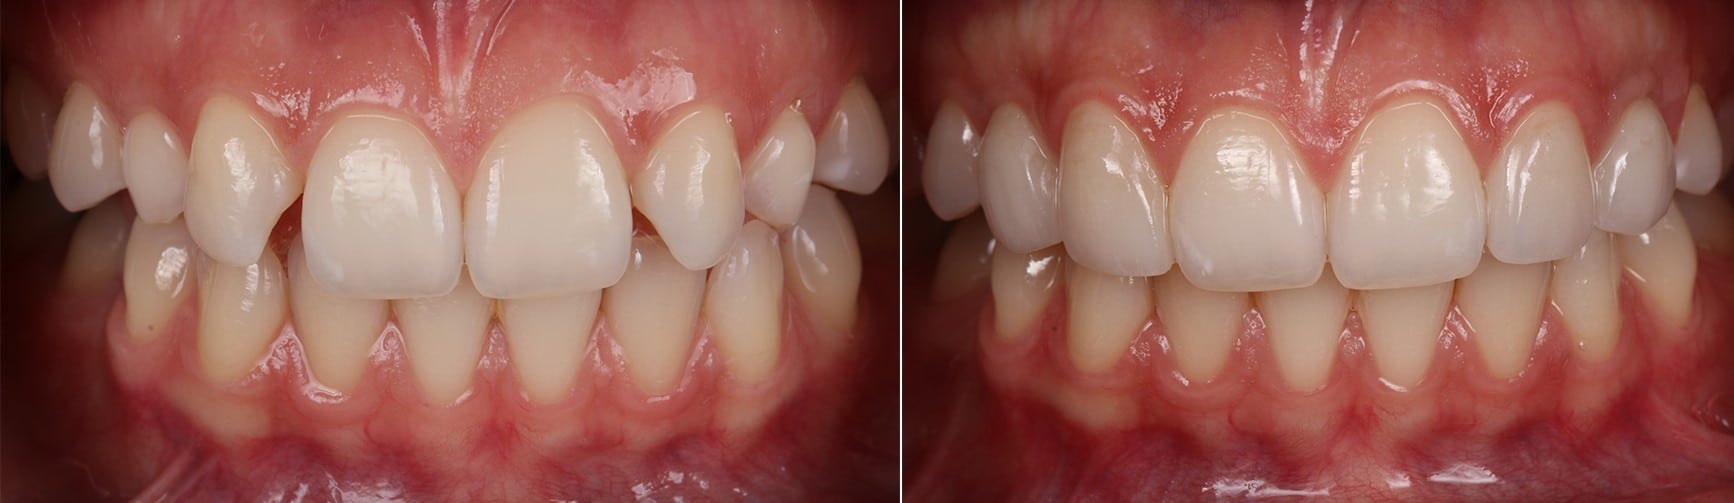 Implant and Crowns Case